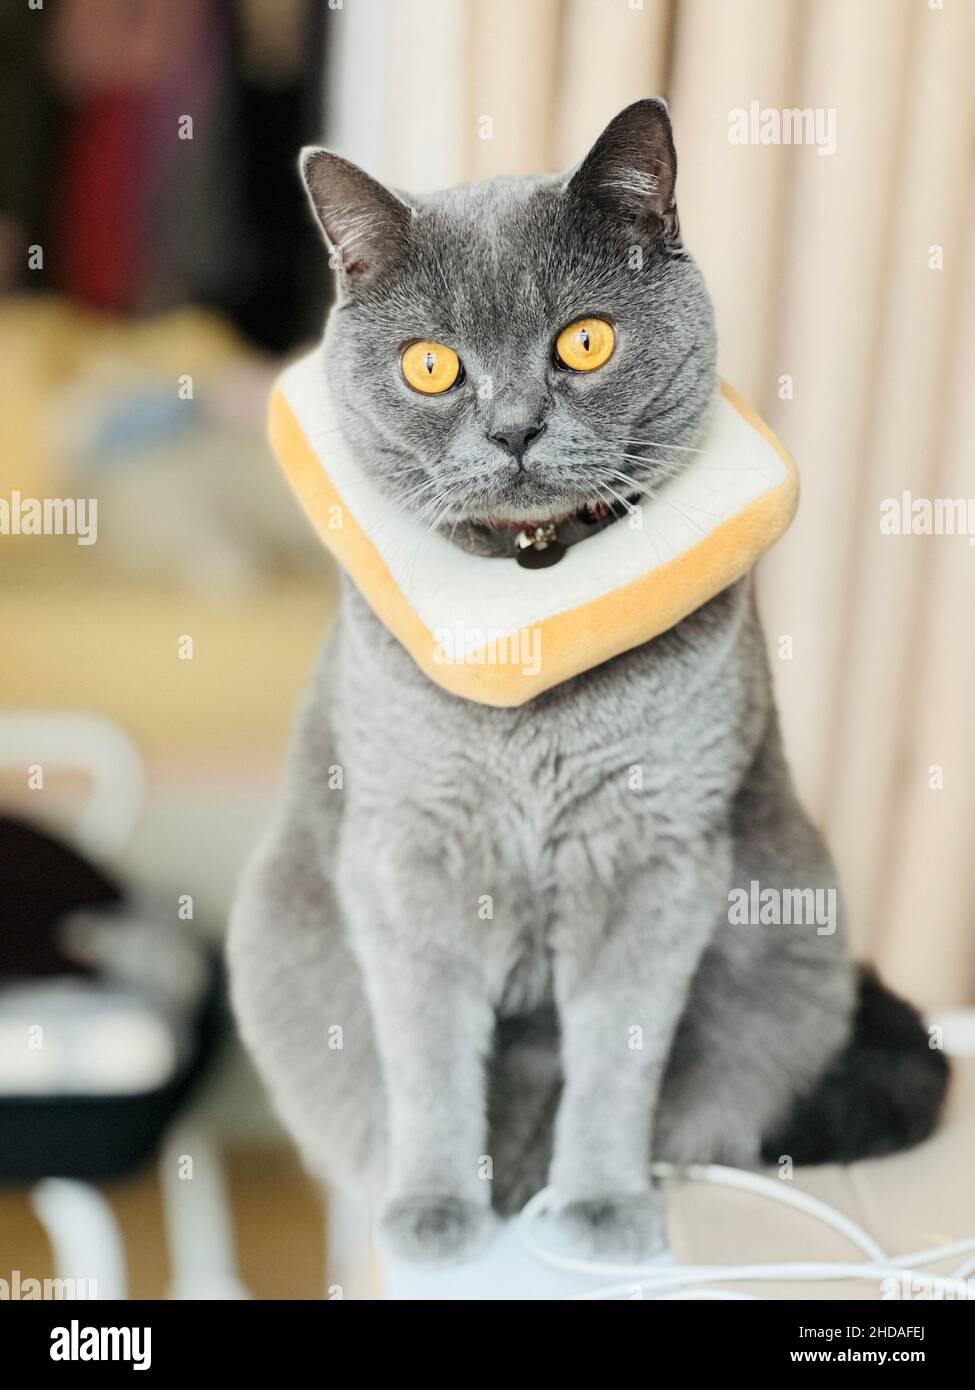 Vertical shot of an adorable gray cat with a funny bread collar and yellow eyes Stock Photo